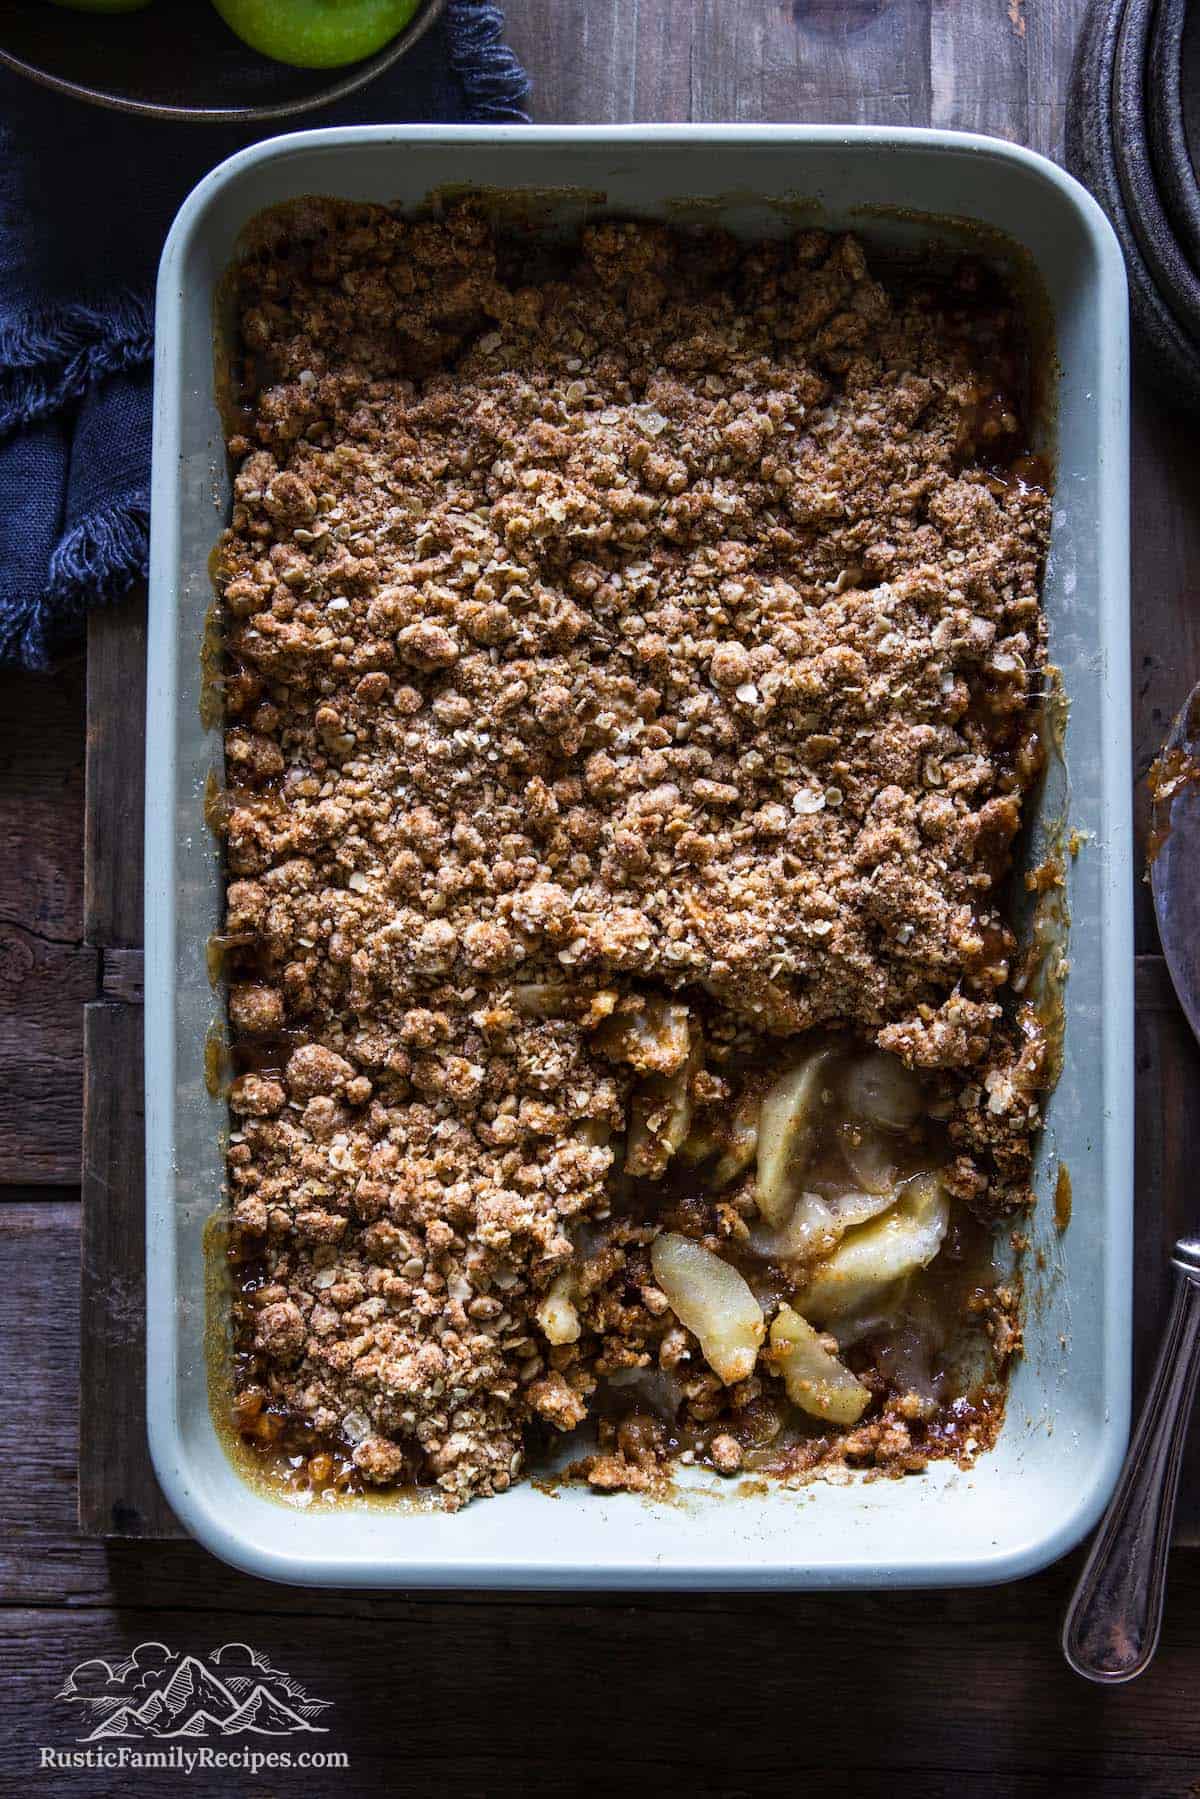 A baking dish filled with baked apple crisp